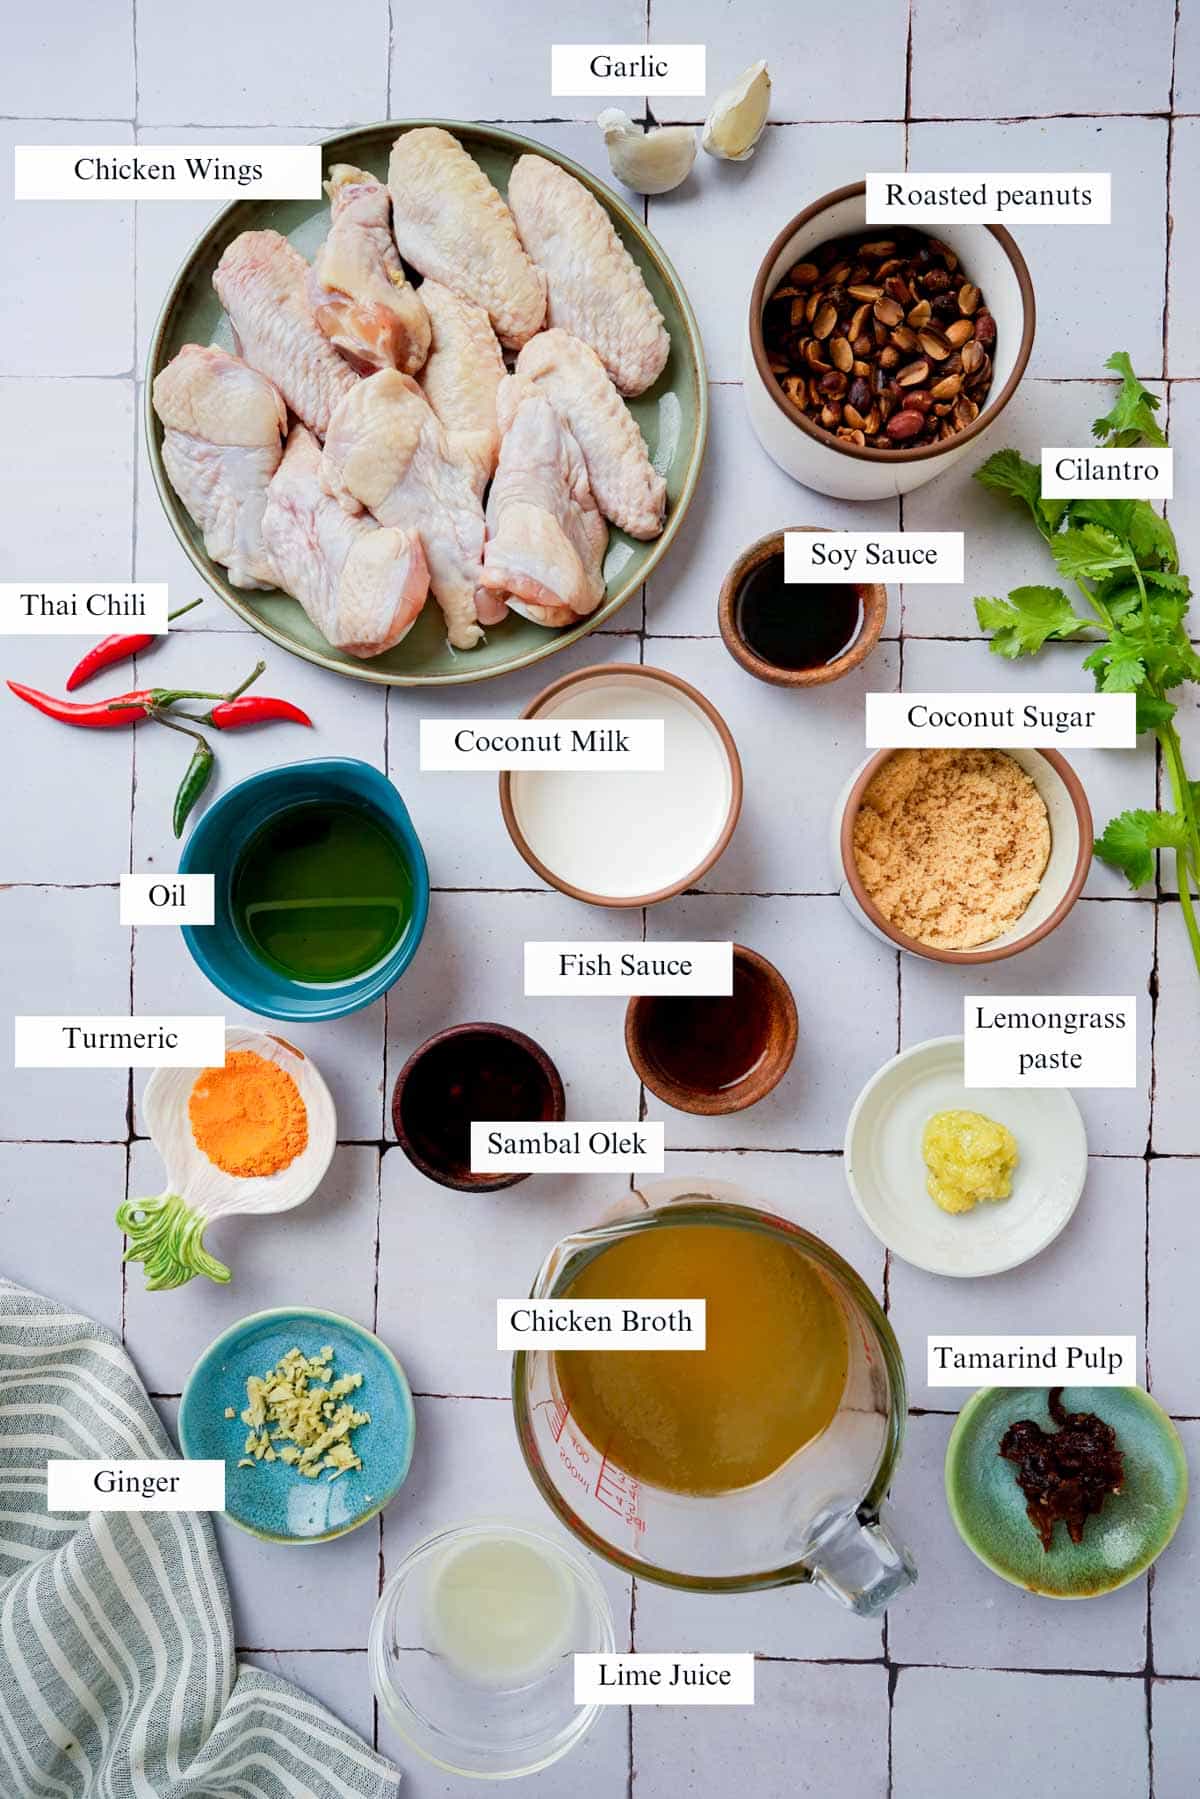 ingredients for thai chicken wings on a board with labels.